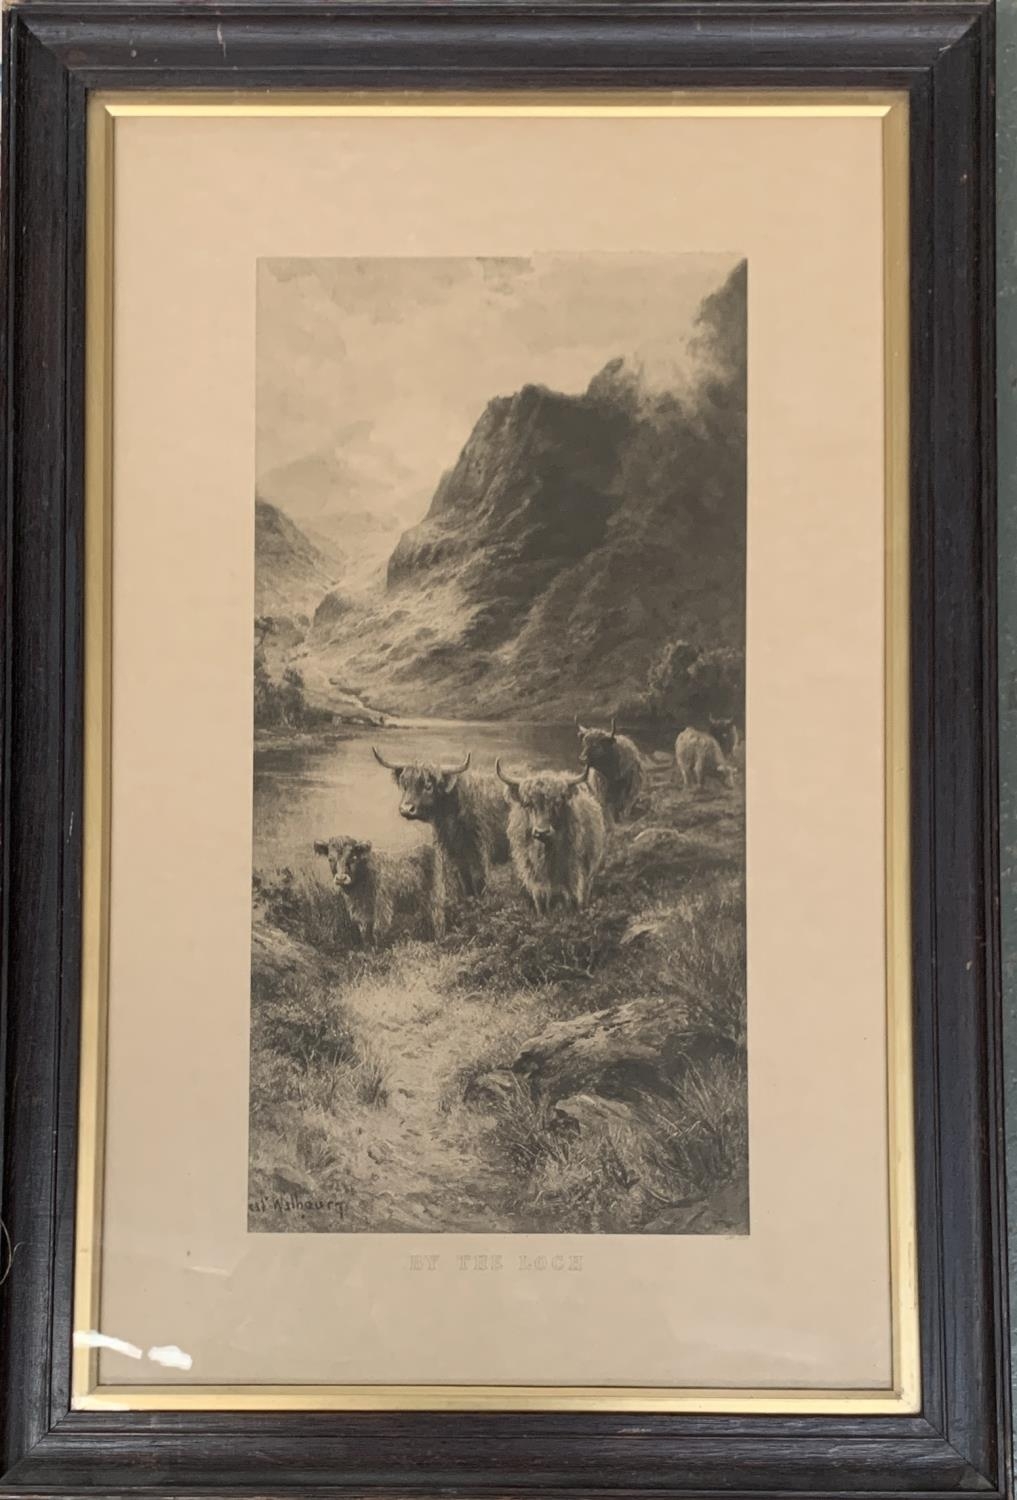 A print of highland cattle, 'By the Loch', 71x45cm